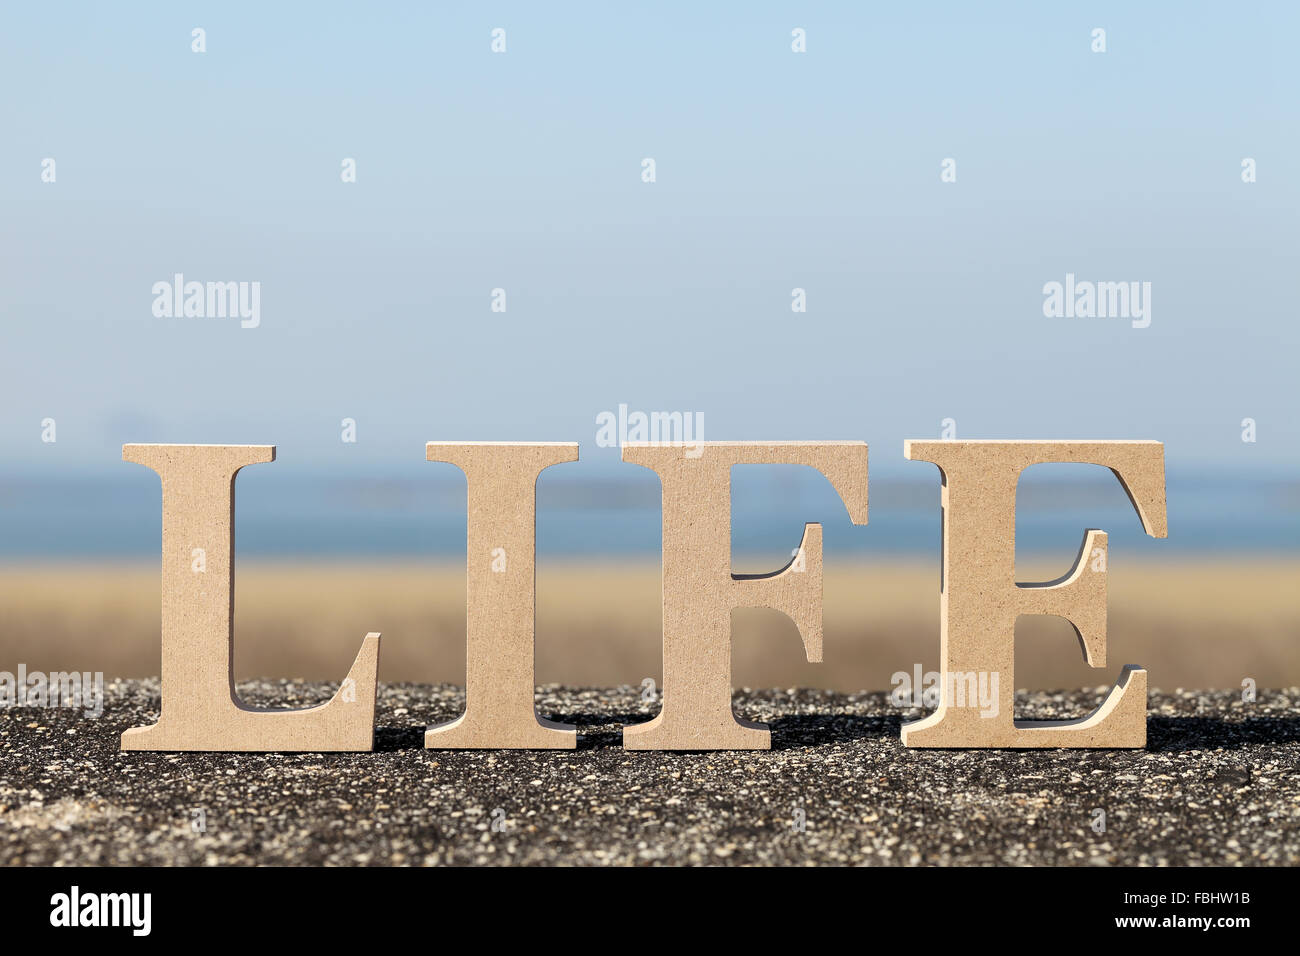 Word life made with wooden block wooden letters Stock Photo